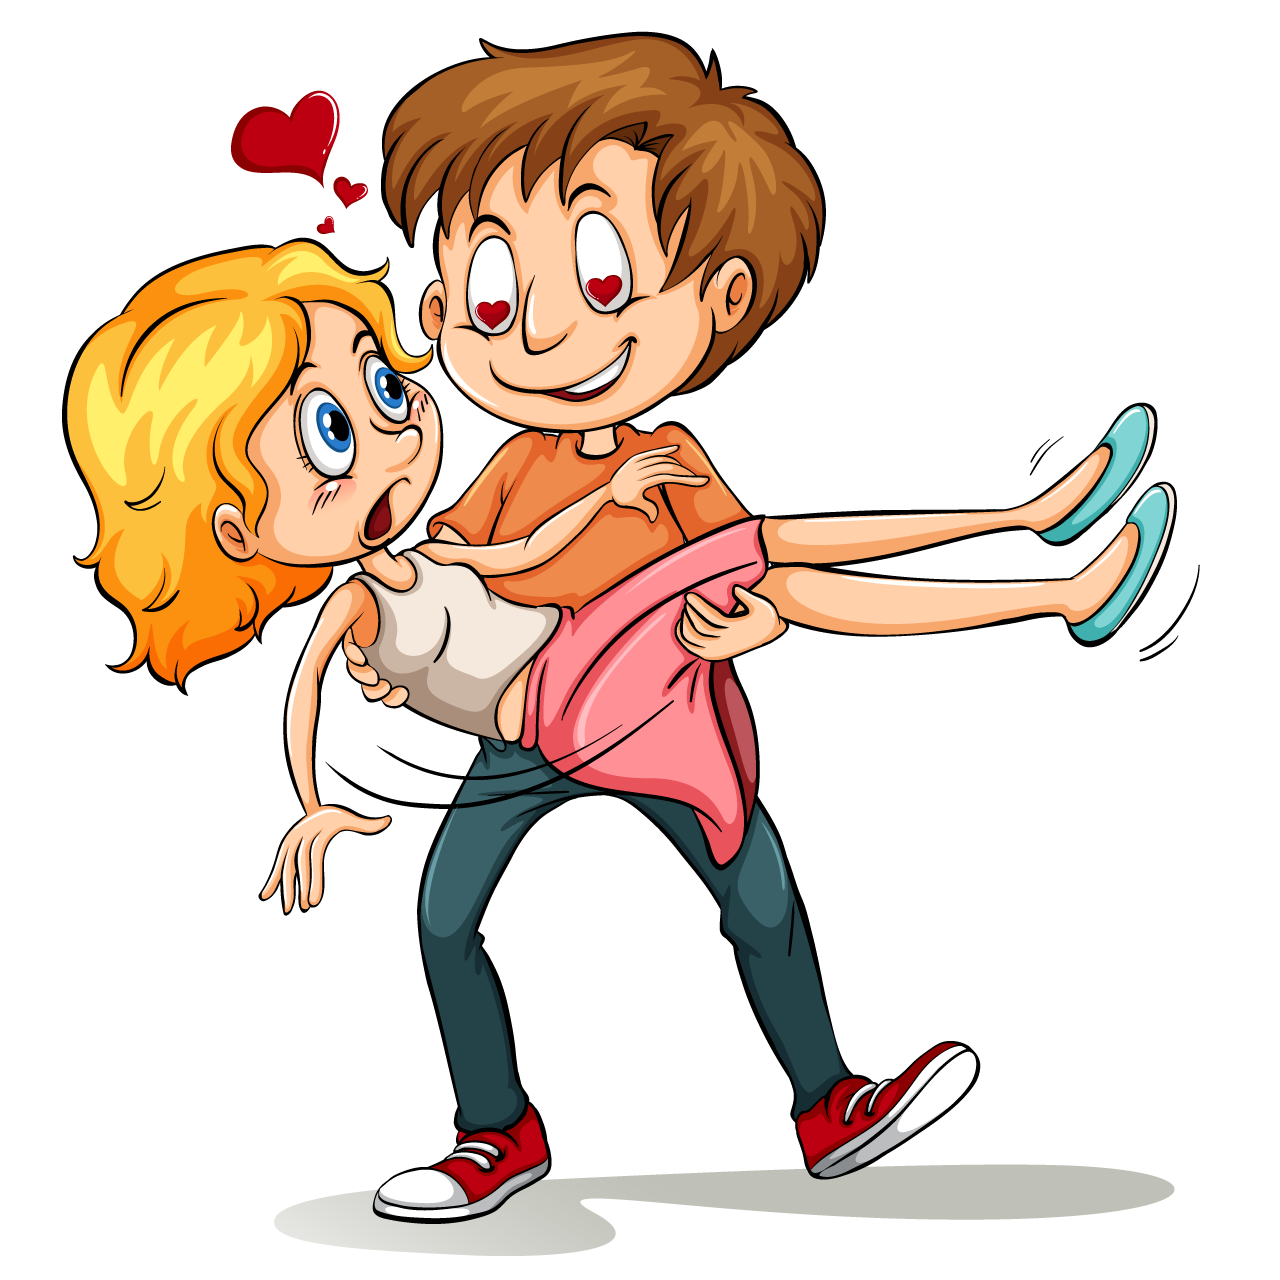 Red heart clipart boy chasing her love cartoon illustration image